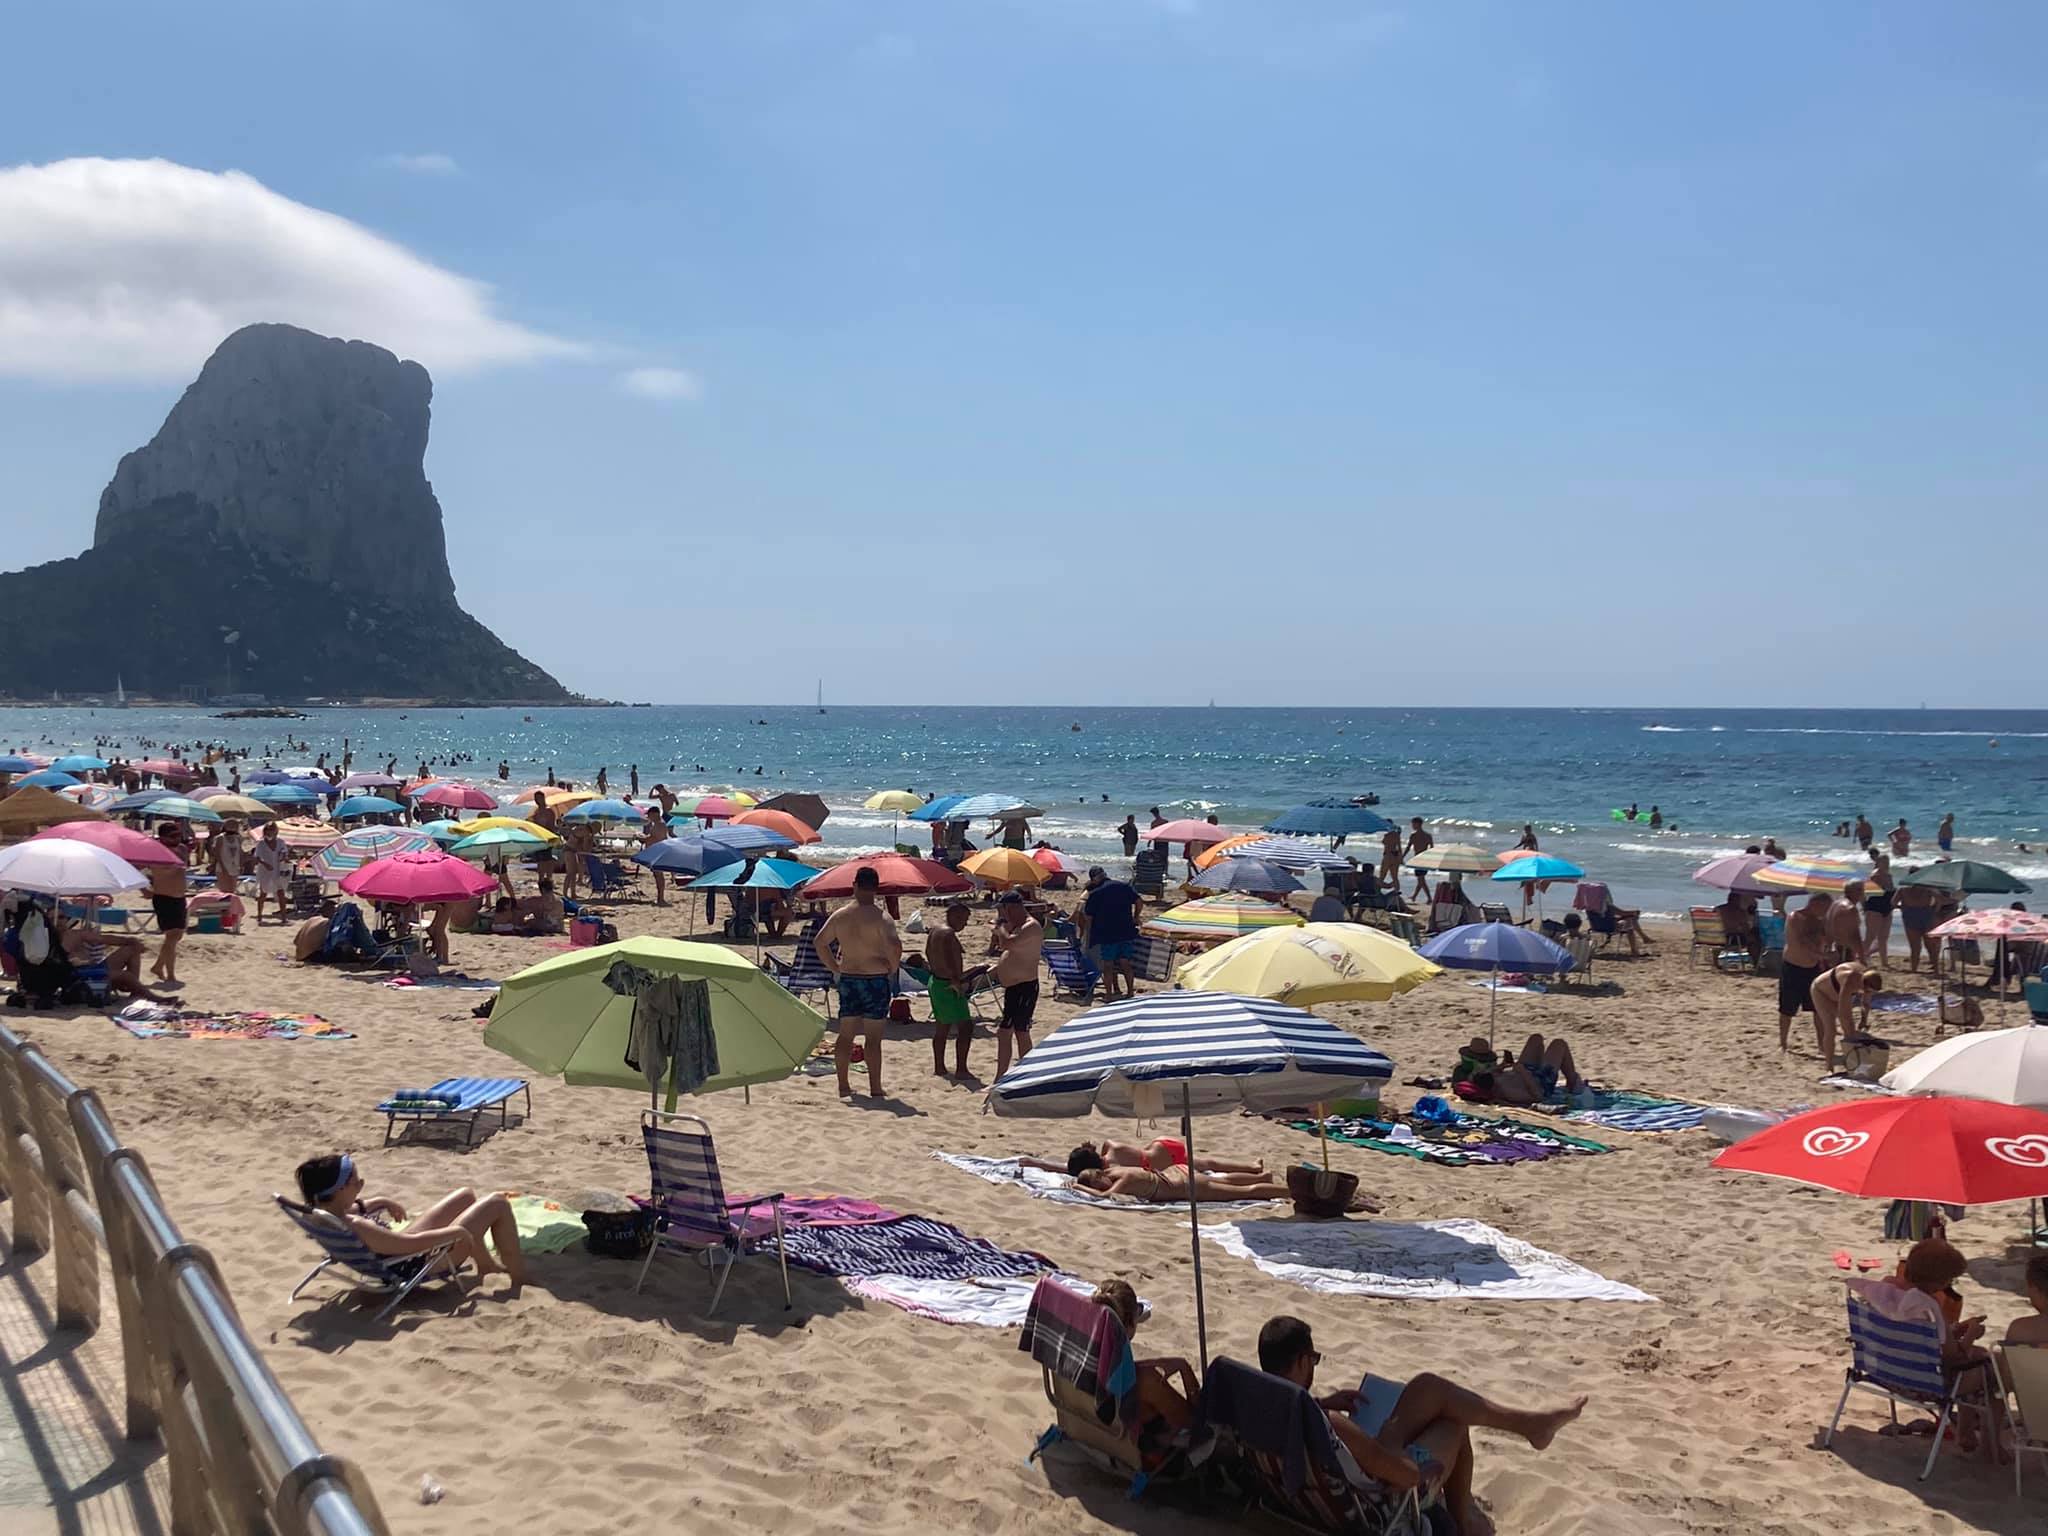 Police Probe Costa Blanca Lifeguard For Making Lewd Sexual Video While Working On A Beach In Spain